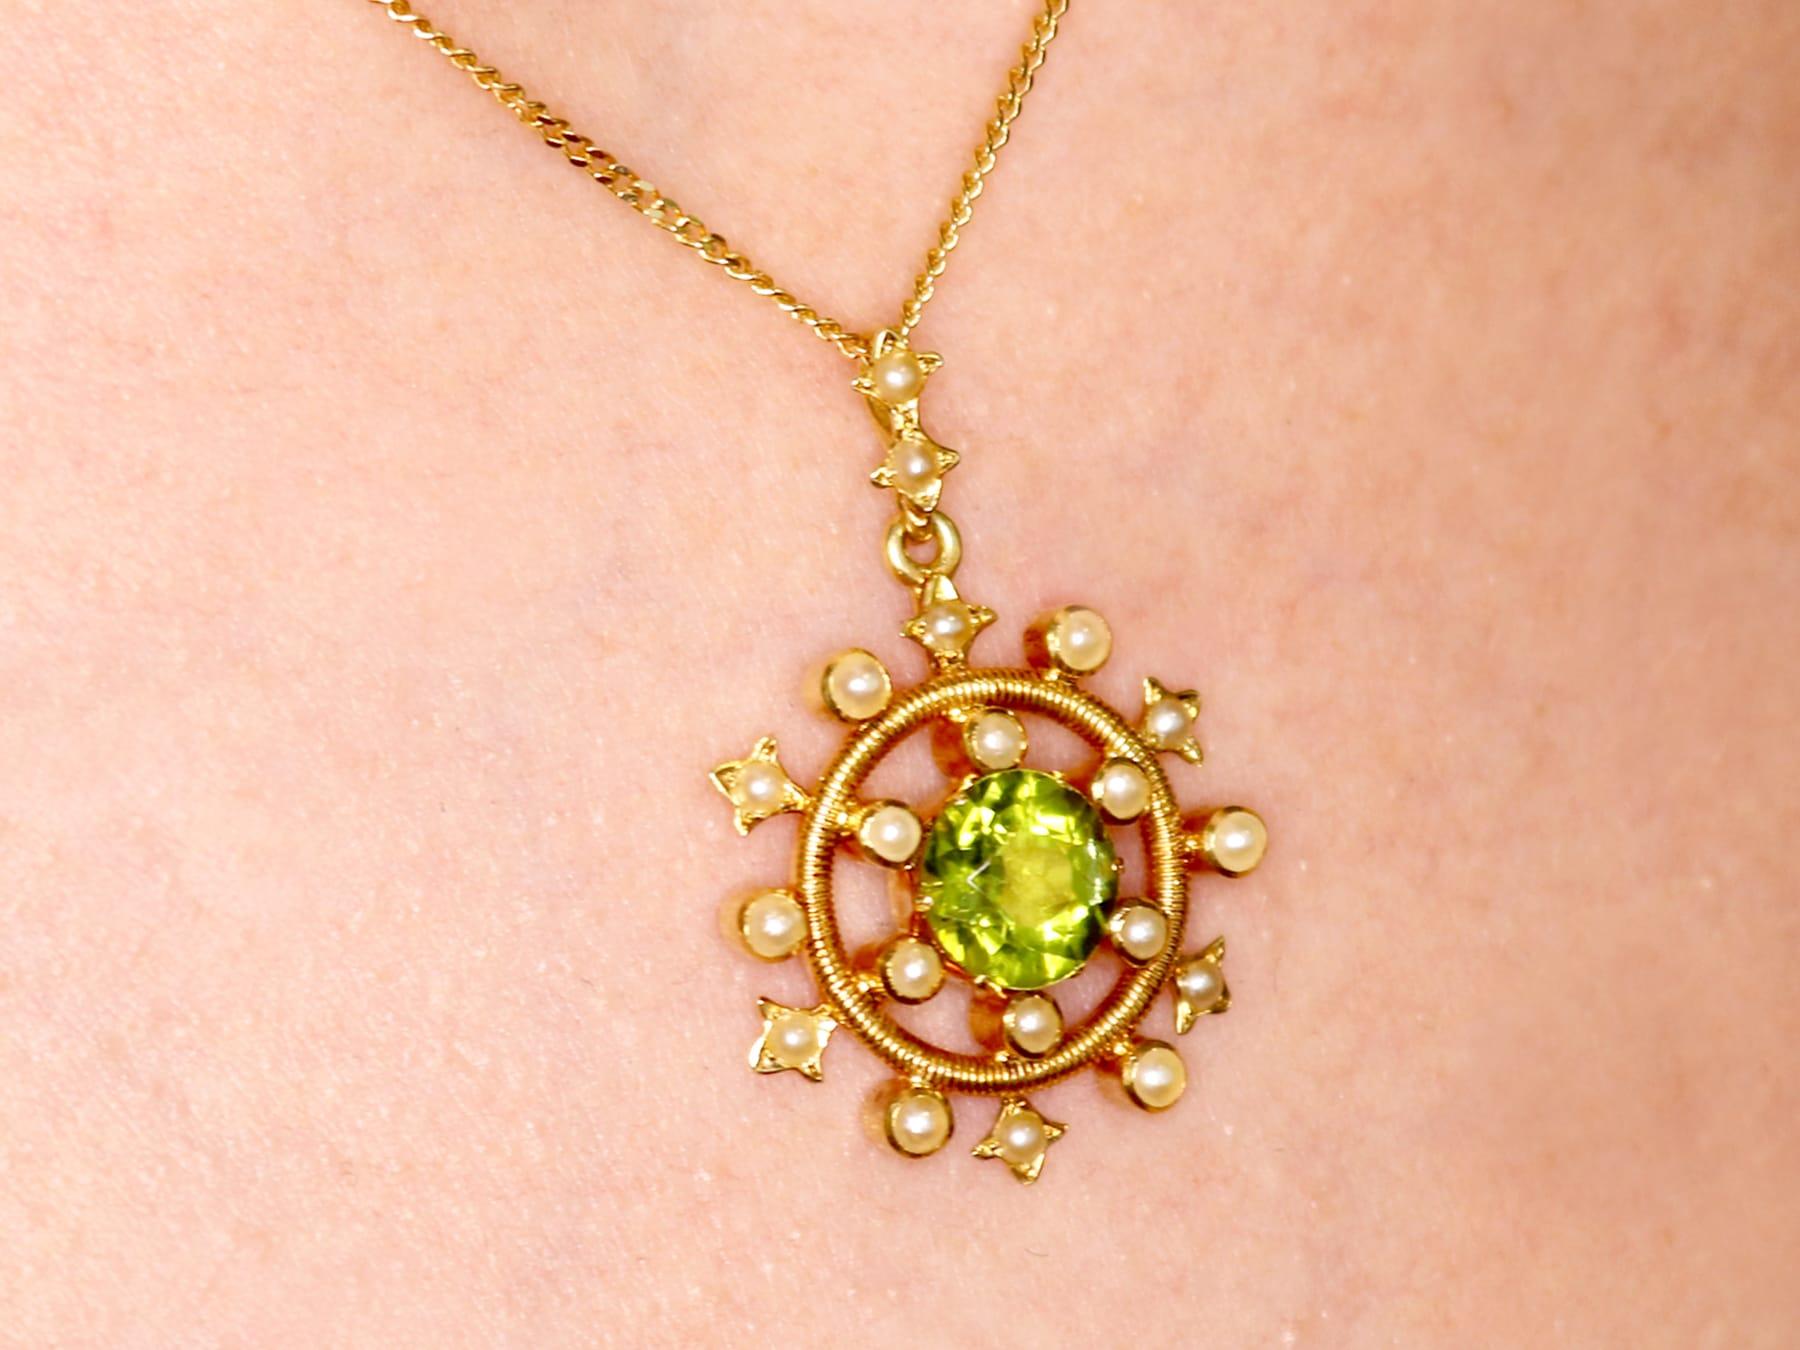 Antique 1.92 Carat Peridot and Seed Pearl Yellow Gold Pendant For Sale 2